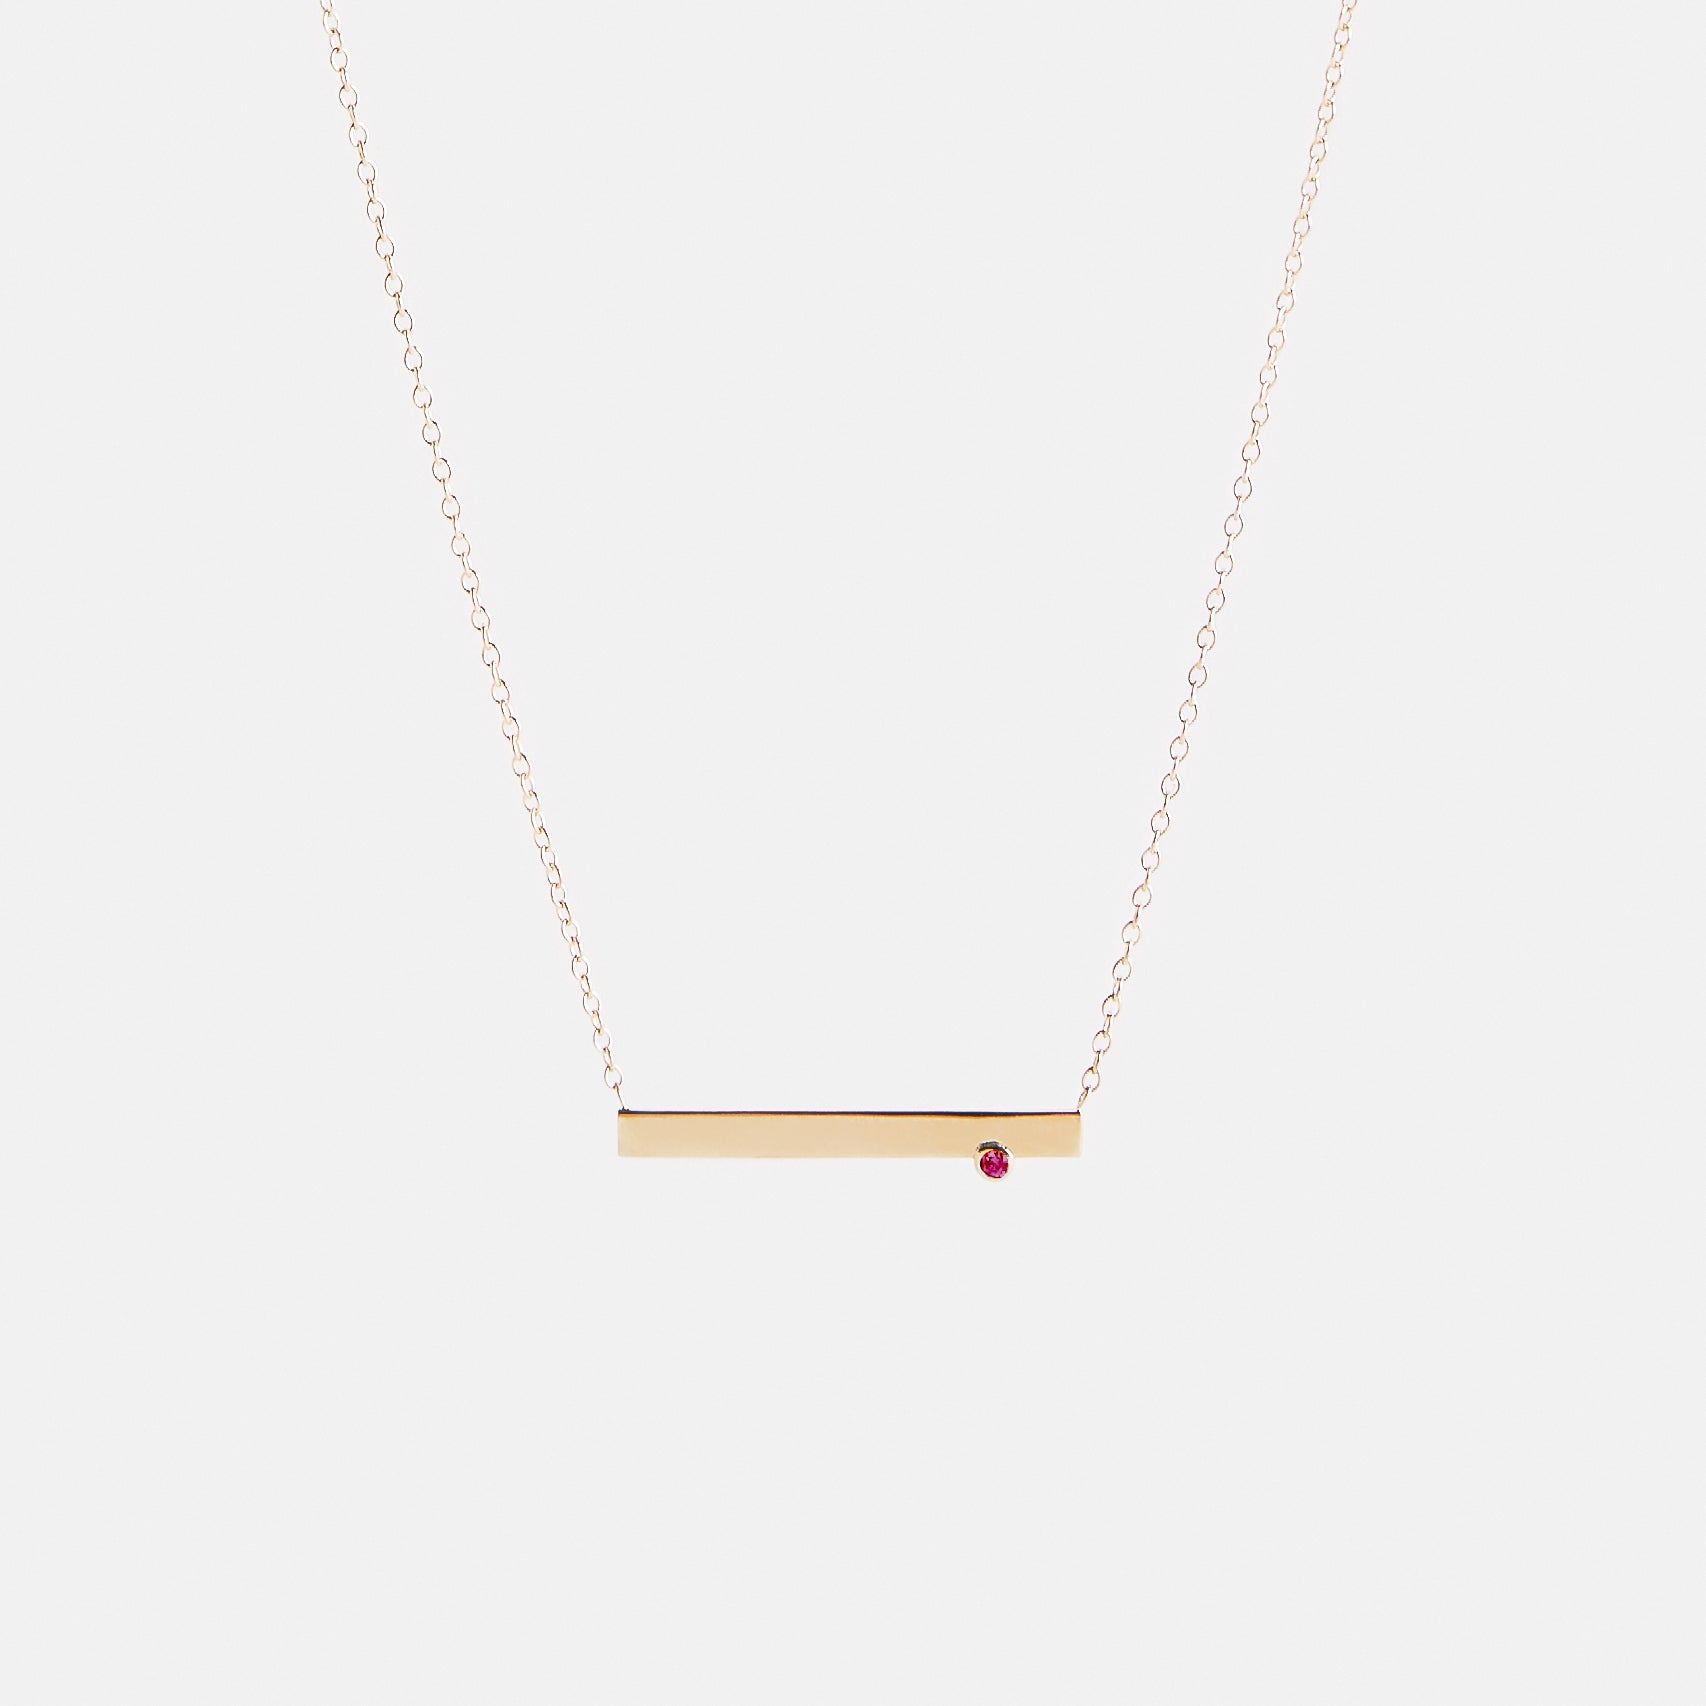 Lane Alternative Necklace in 14k Gold set with Ruby By SHW Fine Jewelry NYC